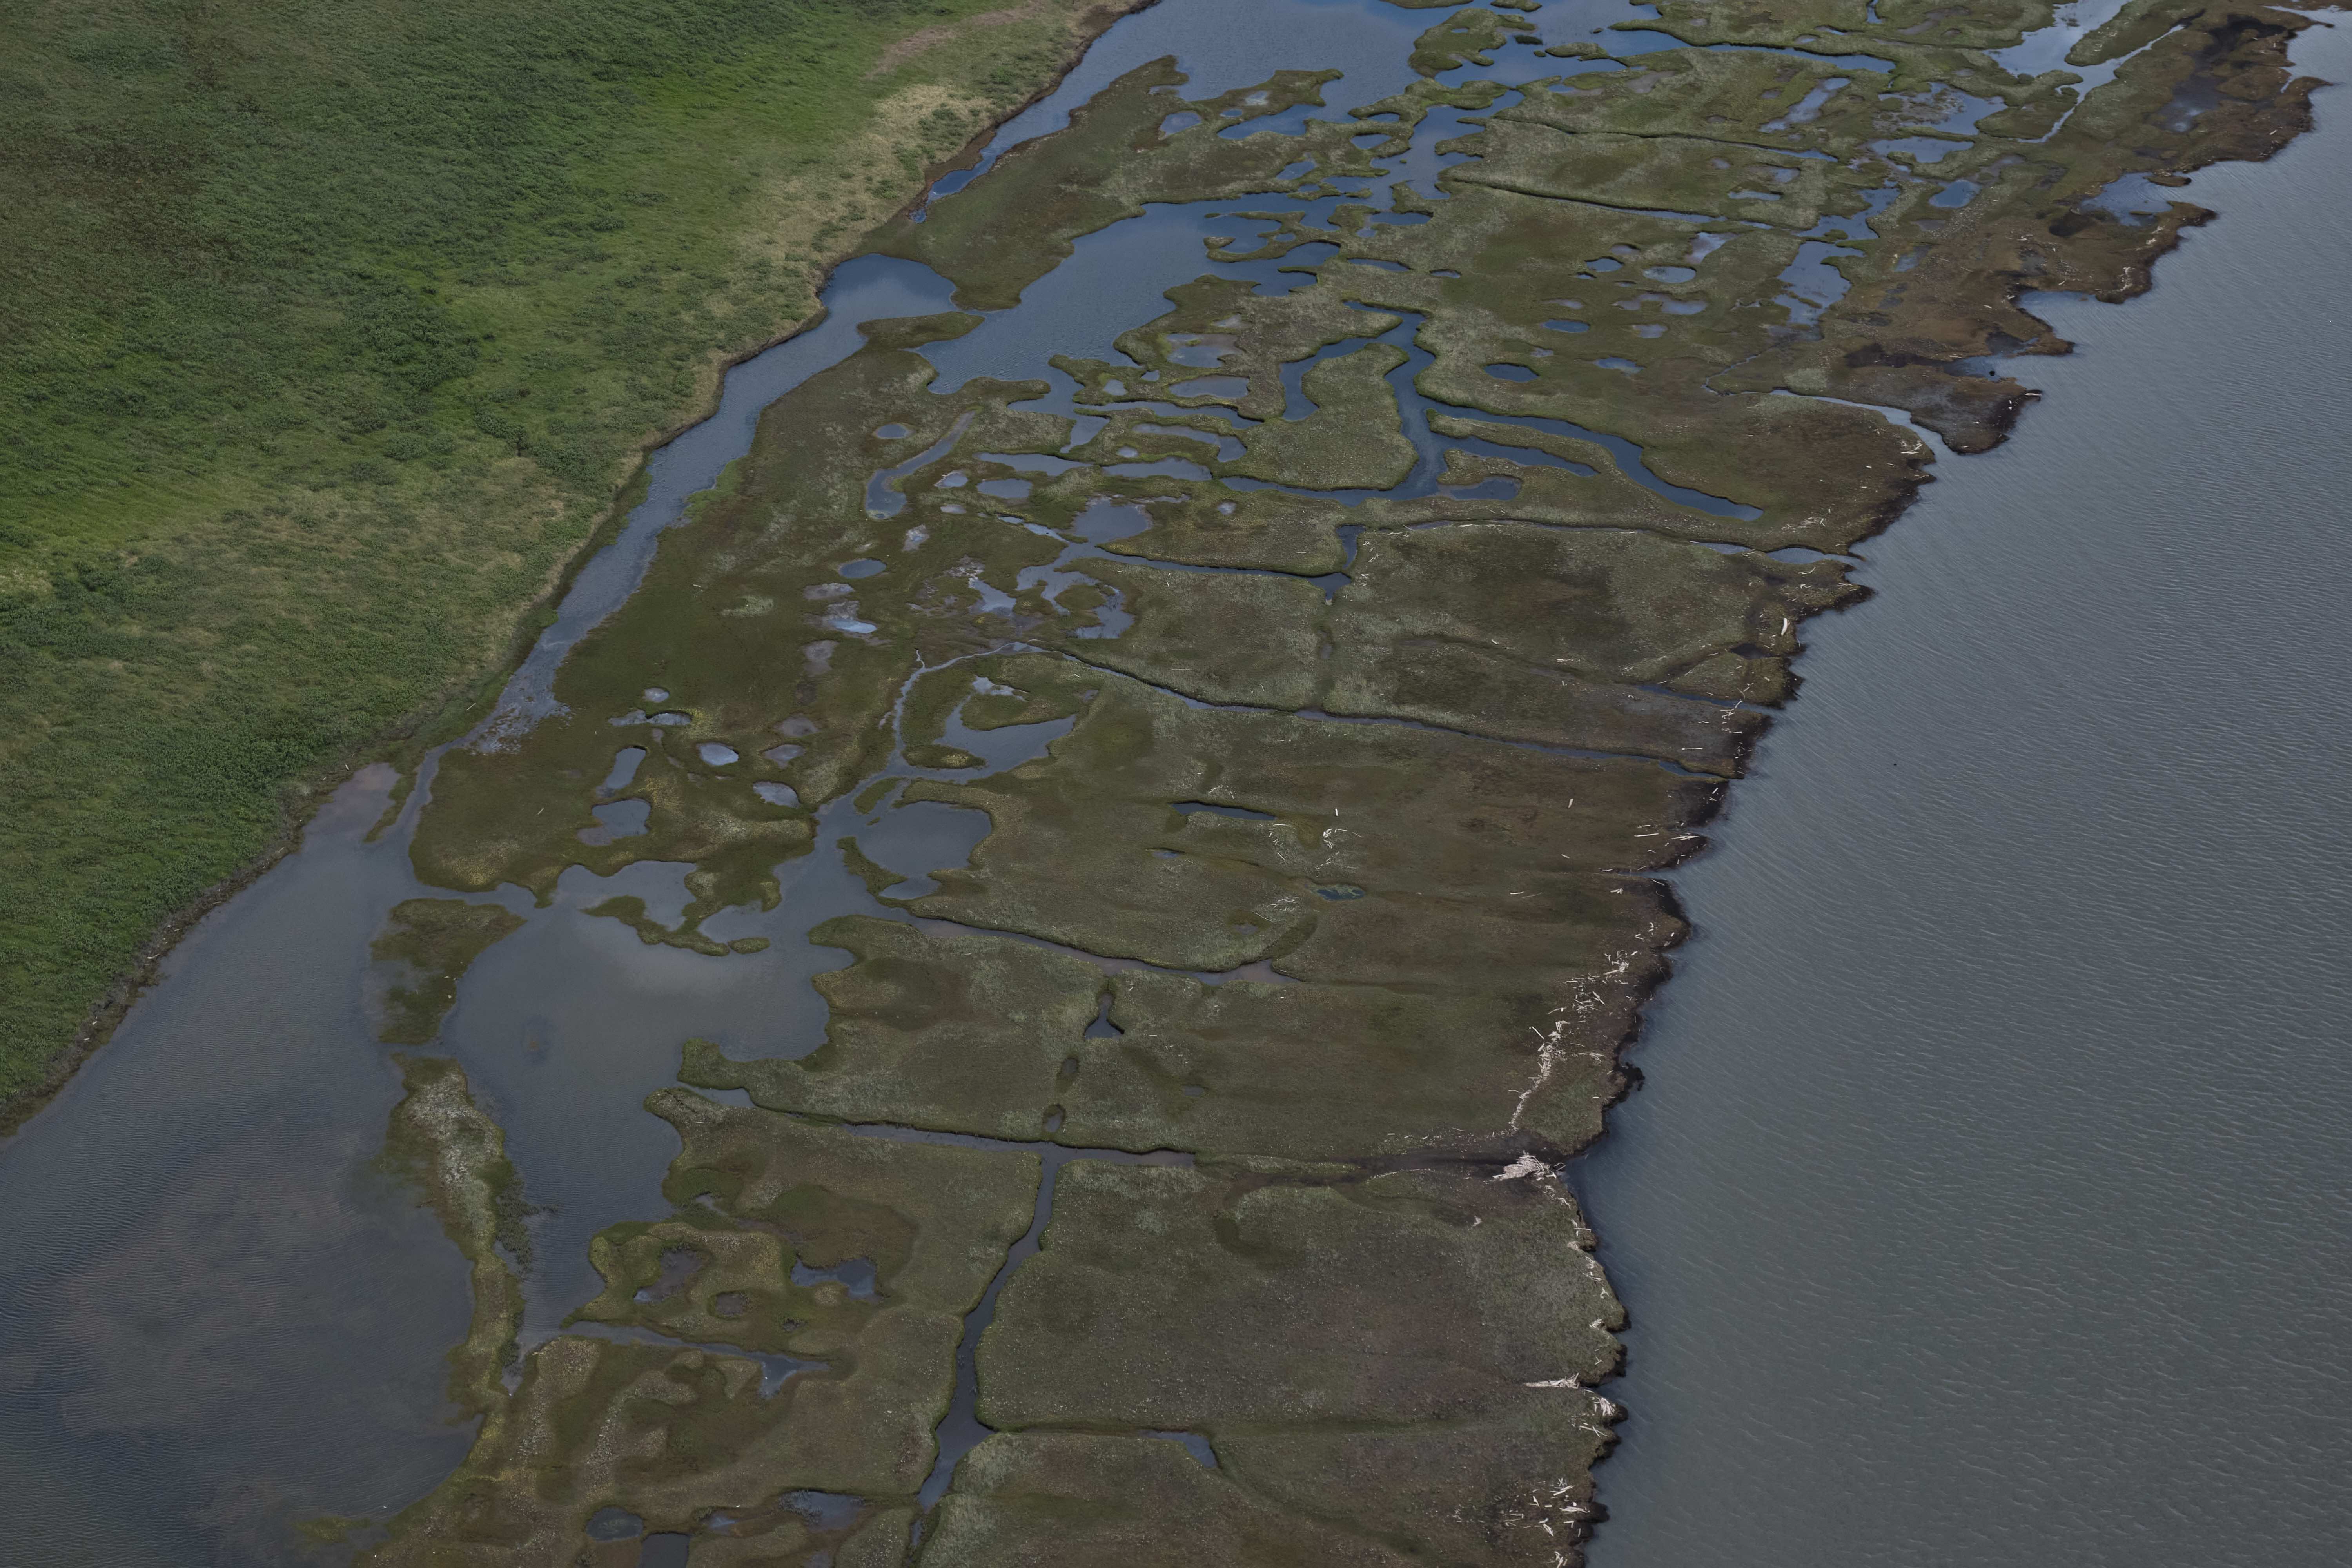 Small watersheds may play a disproportionate role in arctic land-ocean fluxes